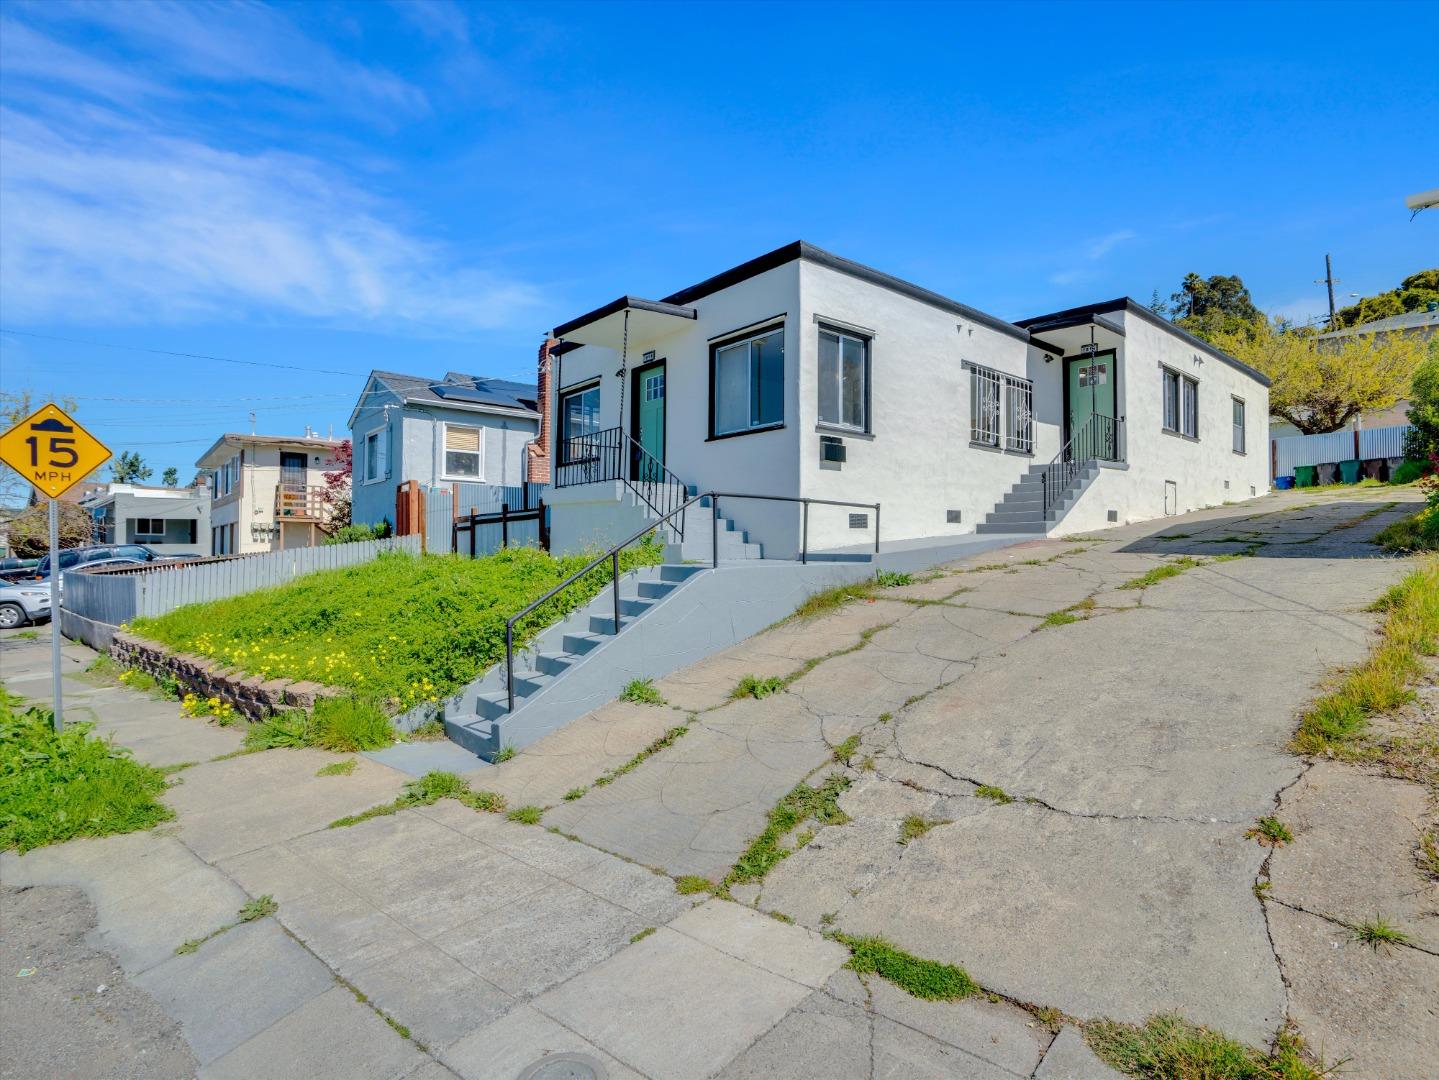 Photo of 7814-7816 Ney Ave in Oakland, CA